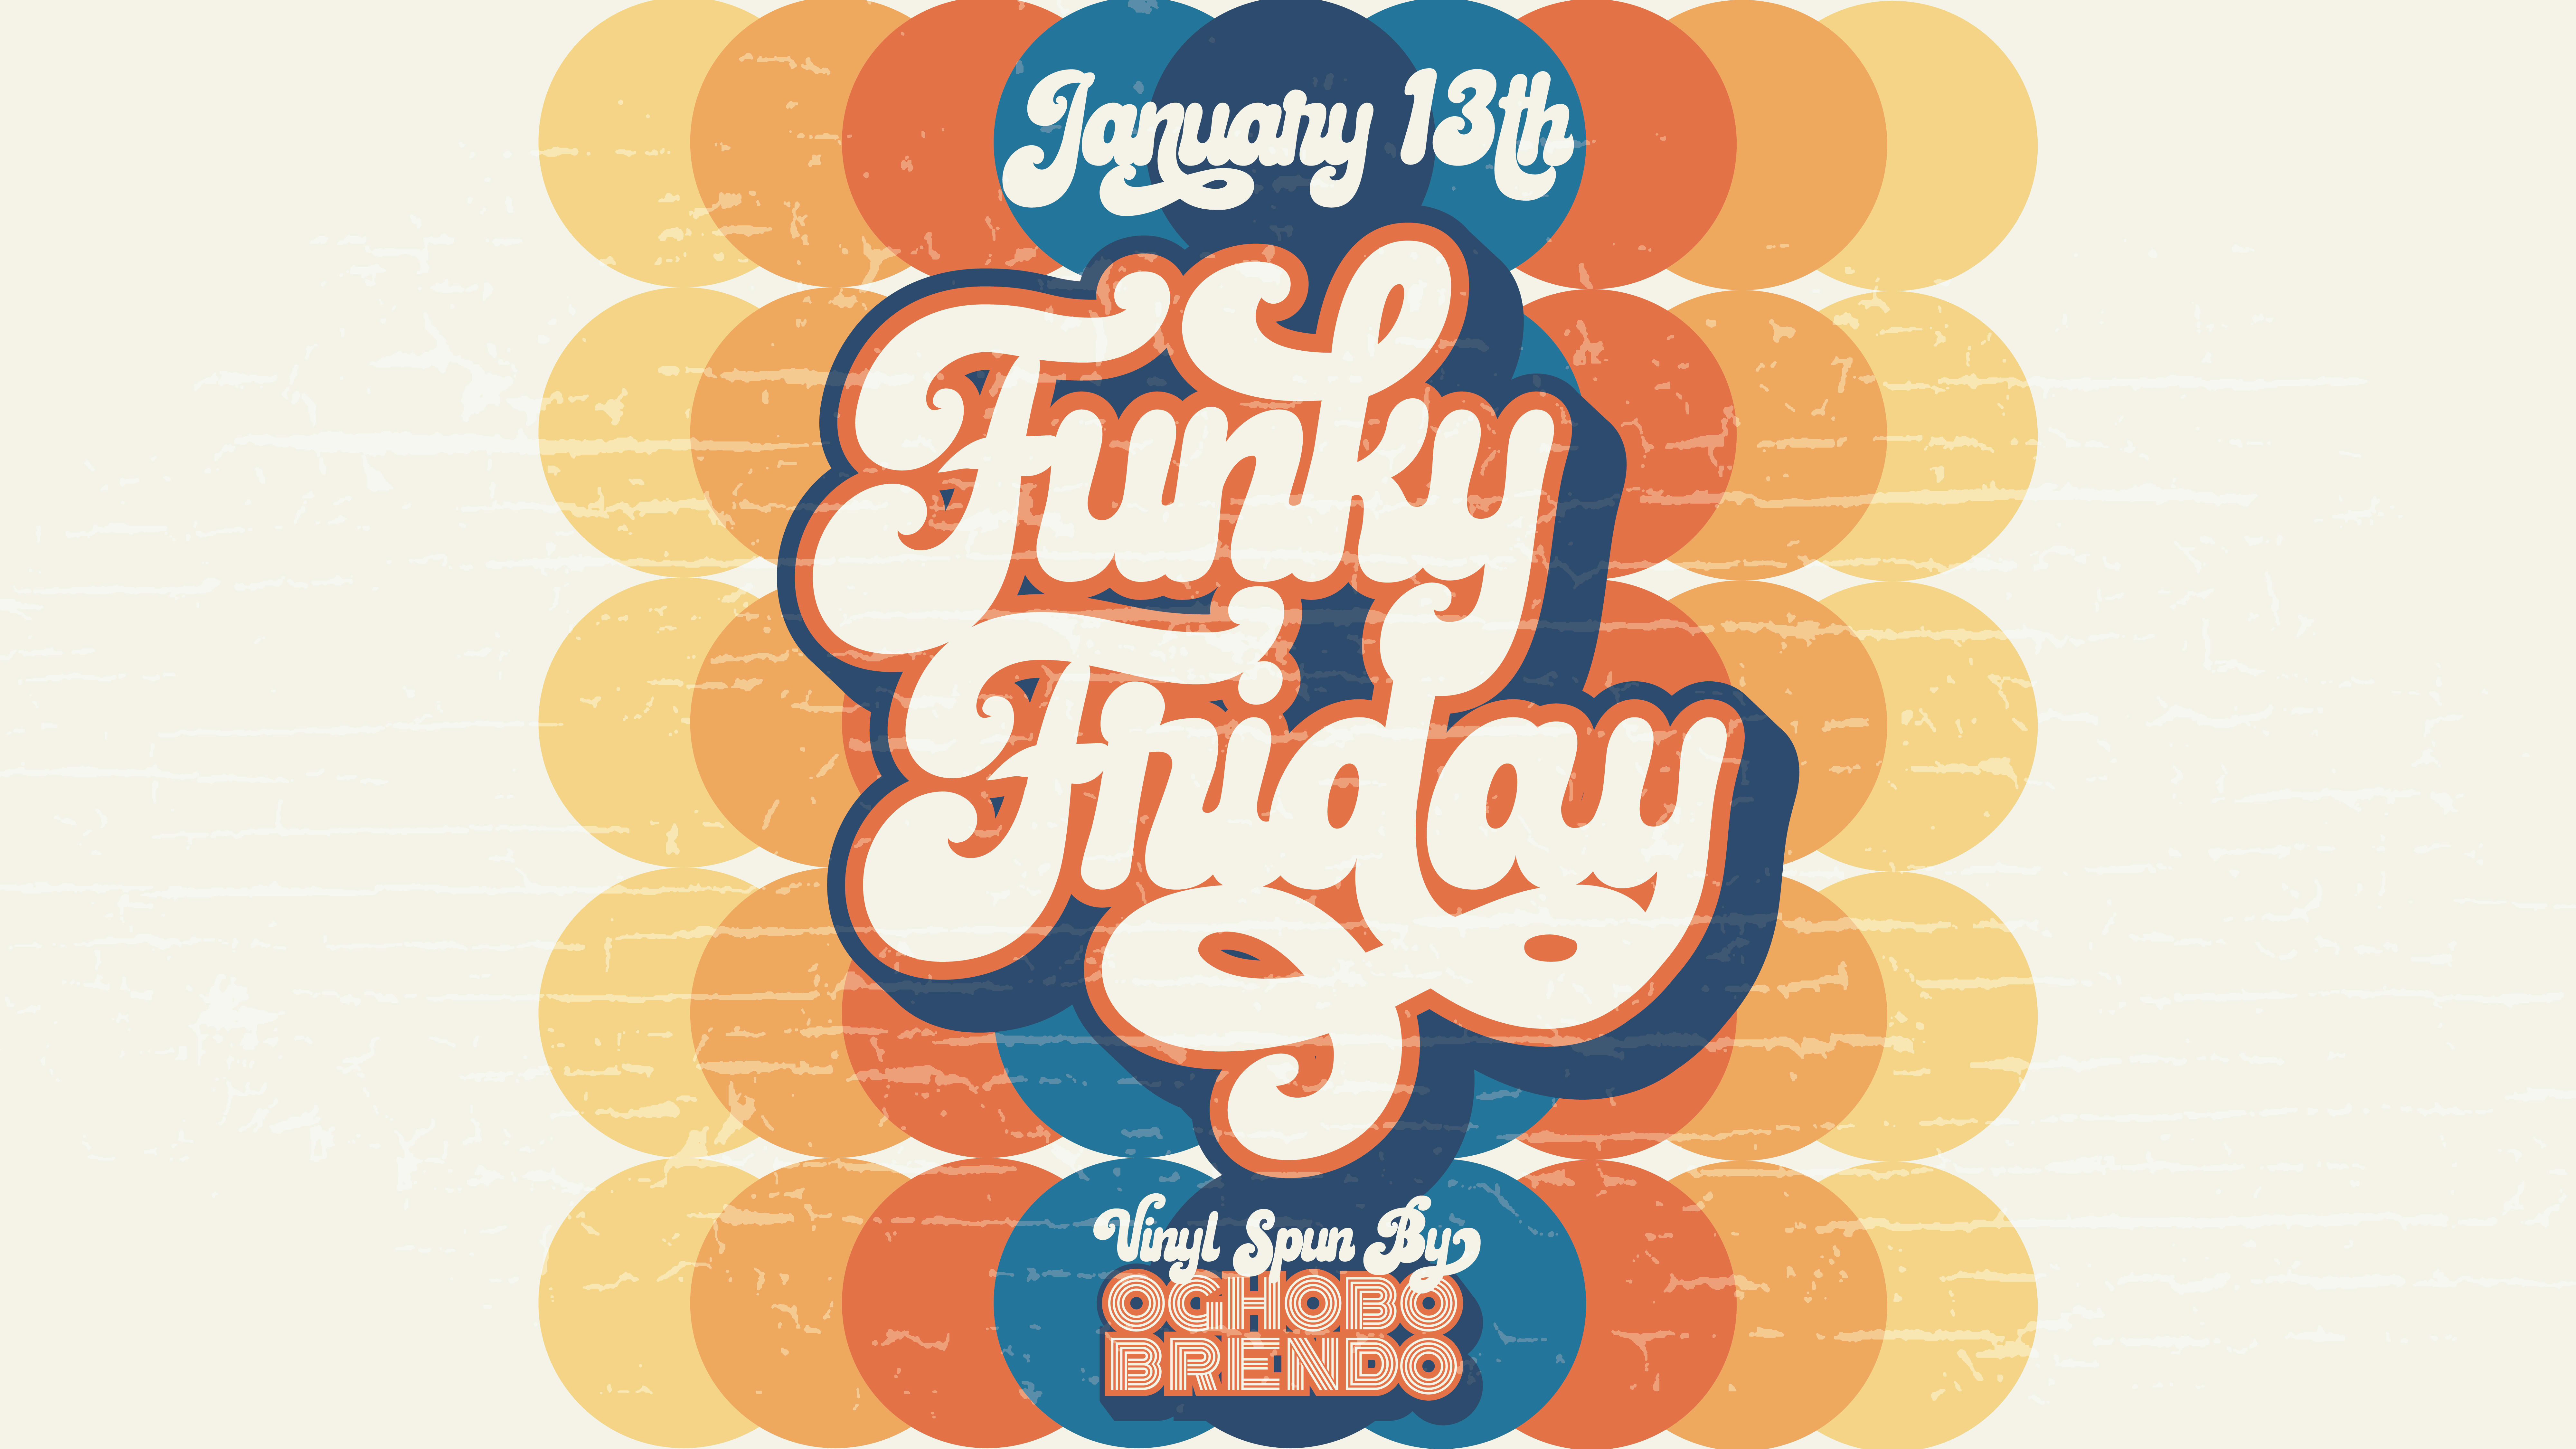 Funky Friday the 13th [01/13/23]